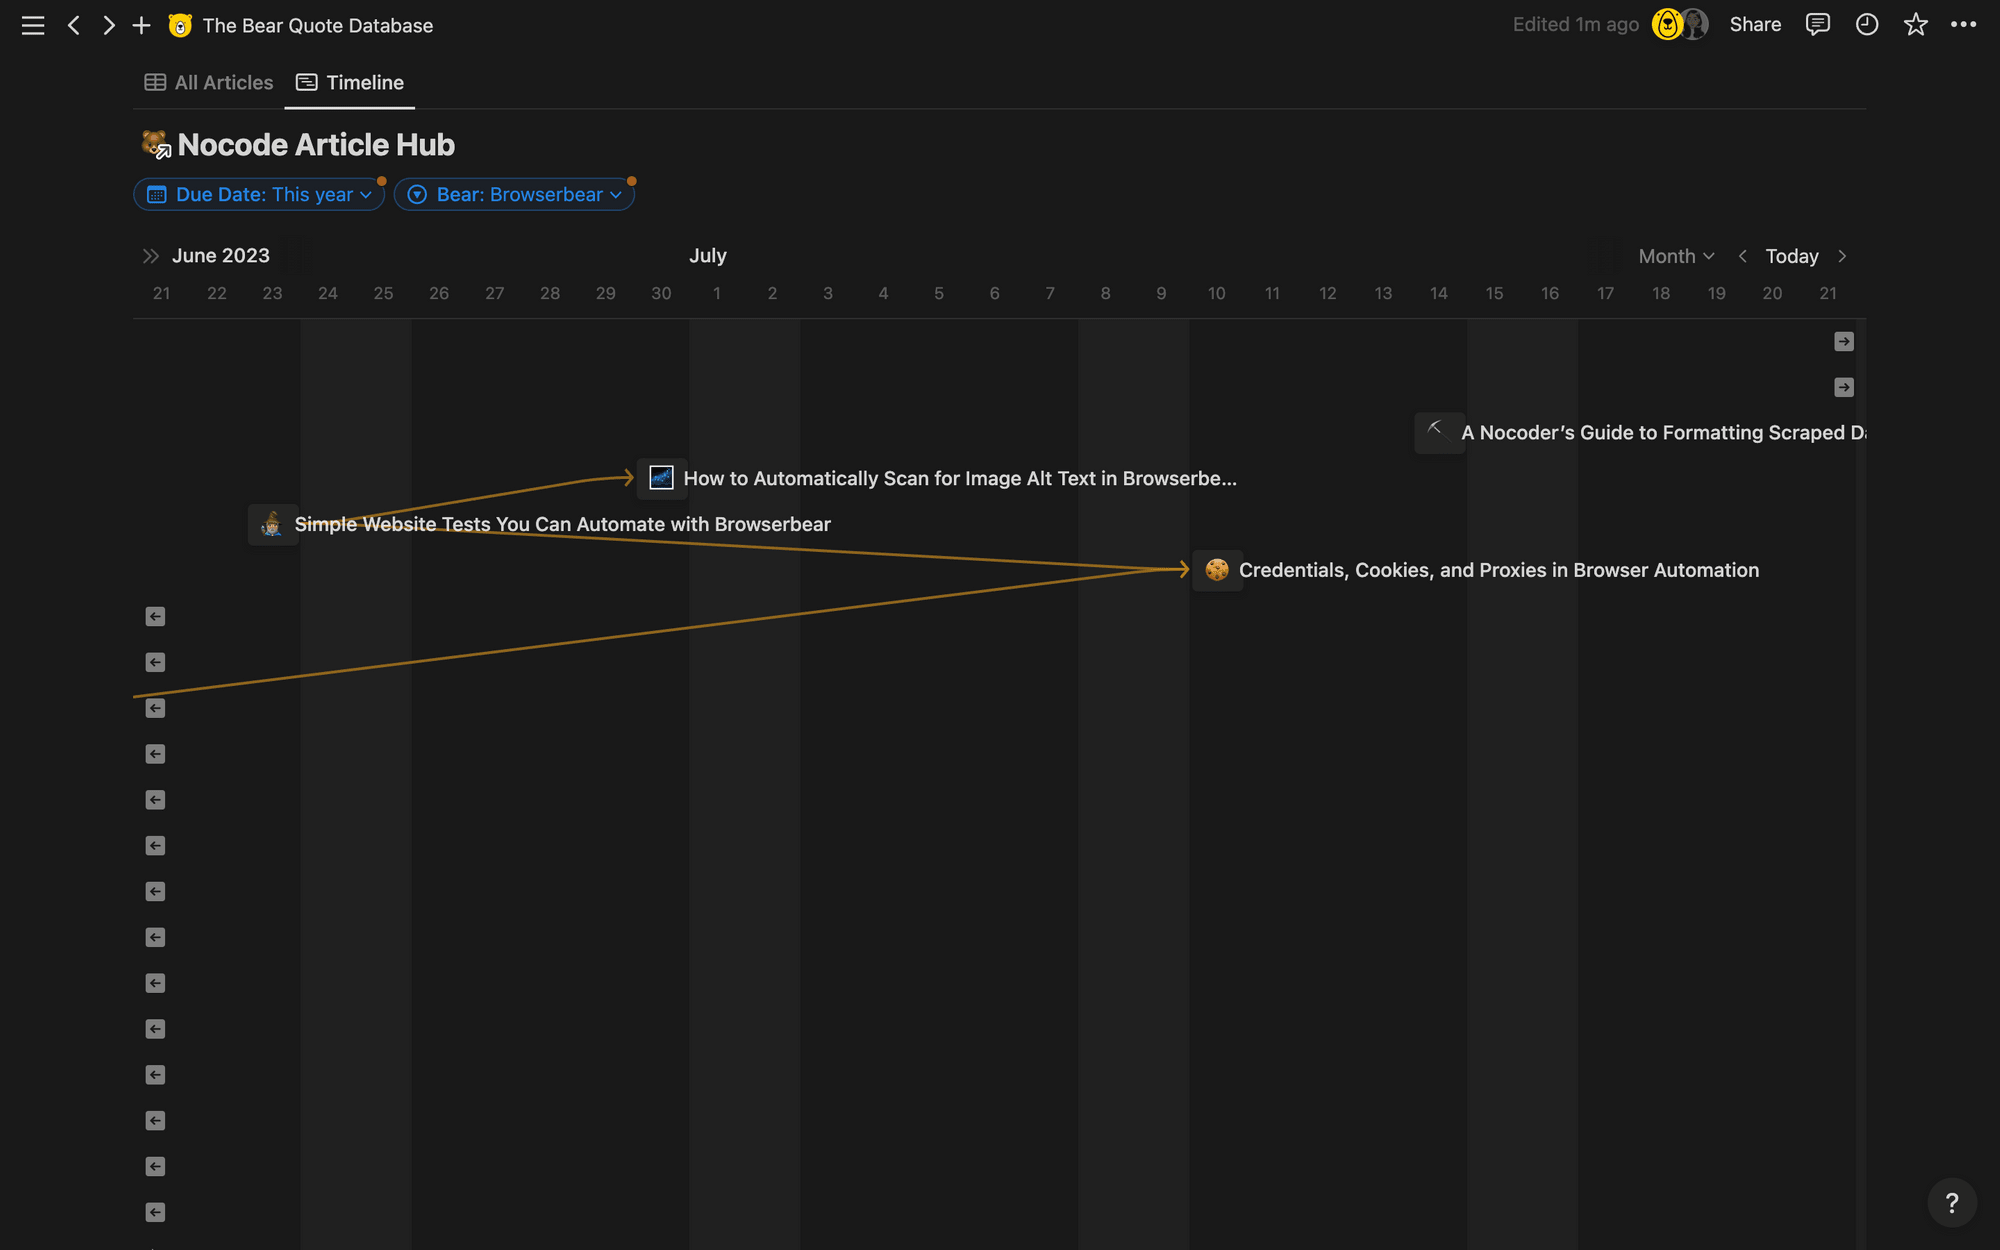 Screenshot of Notion sample database in timeline view